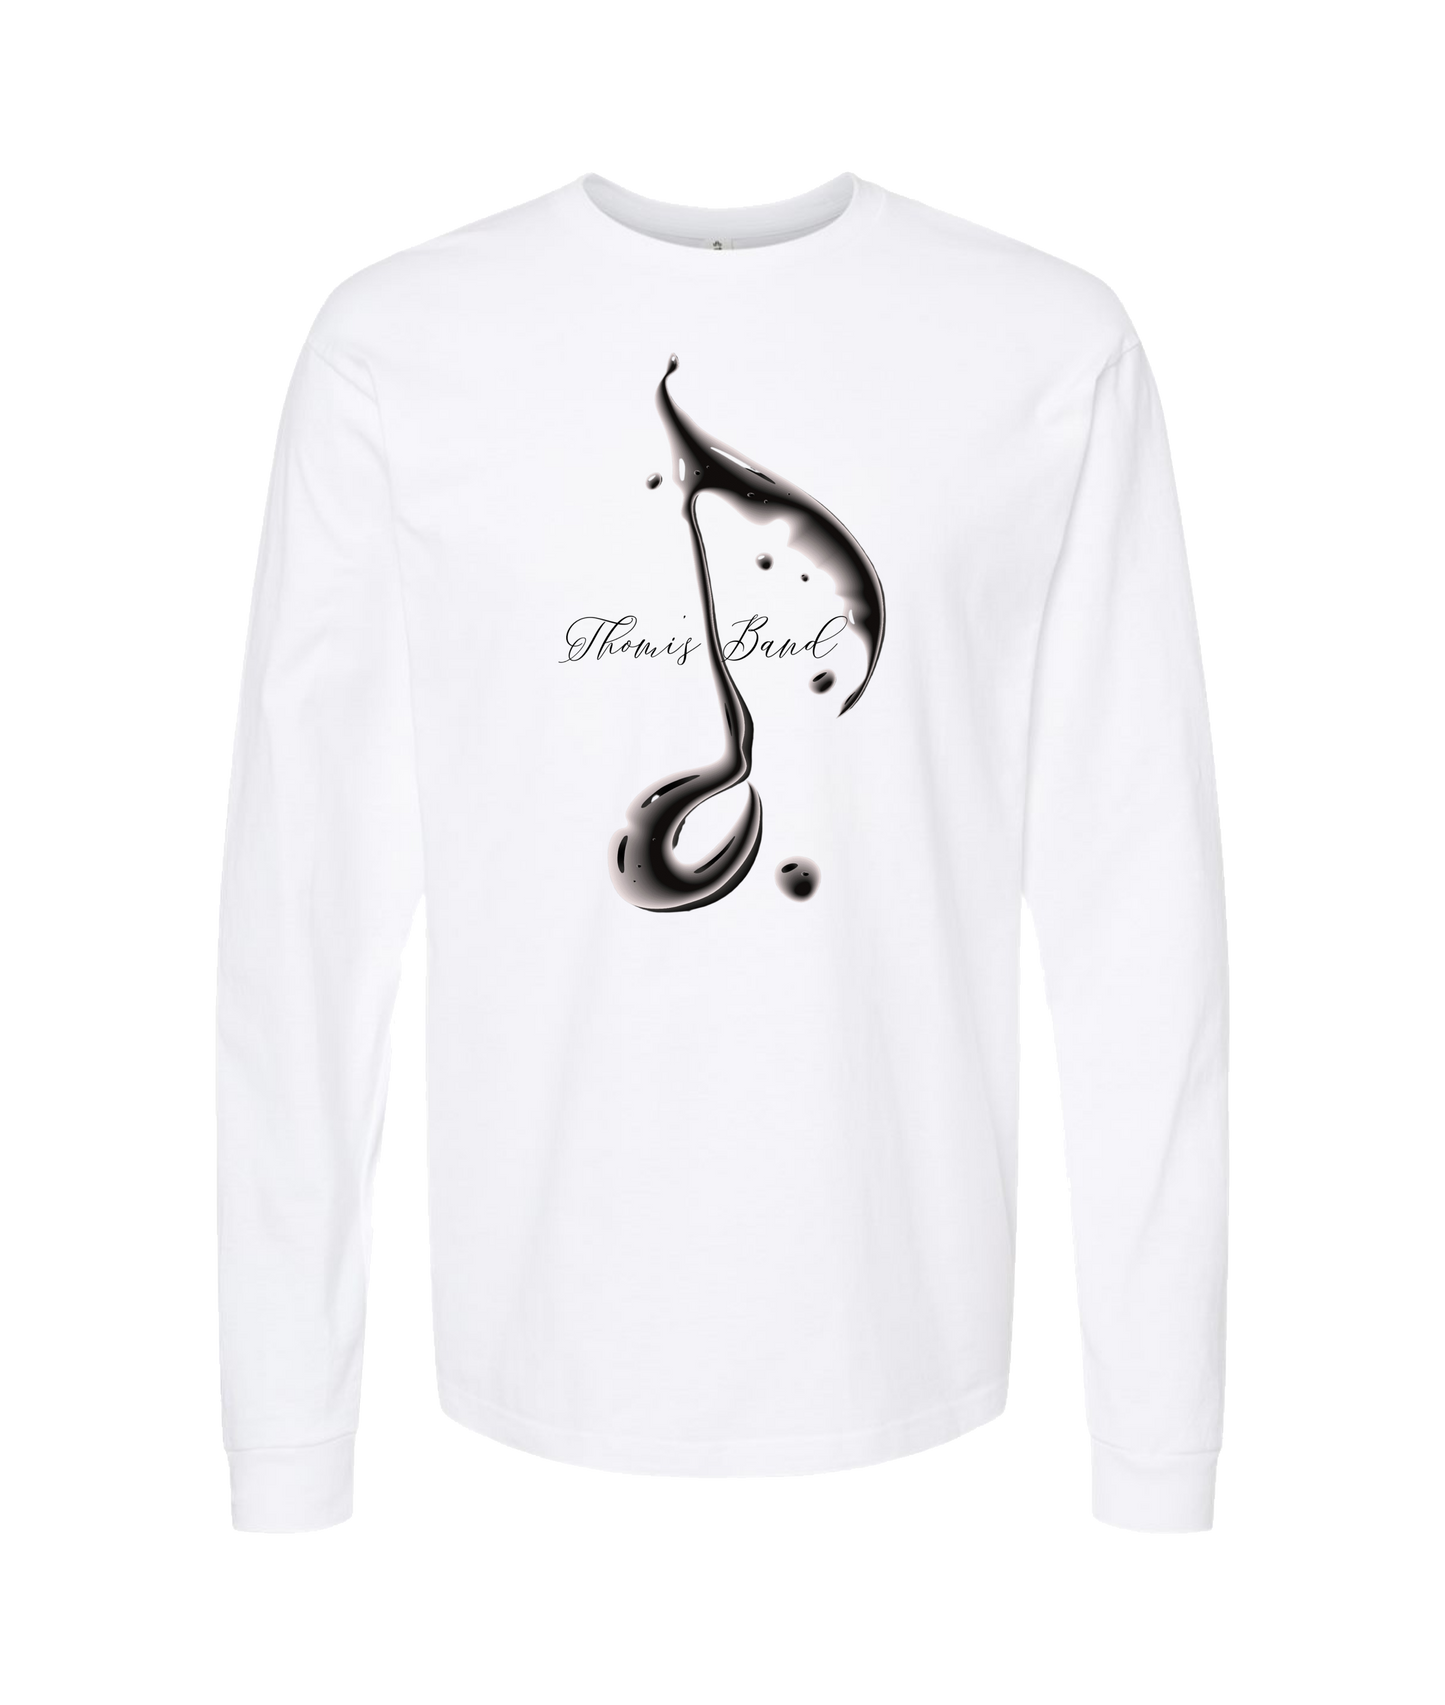 MobiWeb - Thomi’s Band - White Long Sleeve T